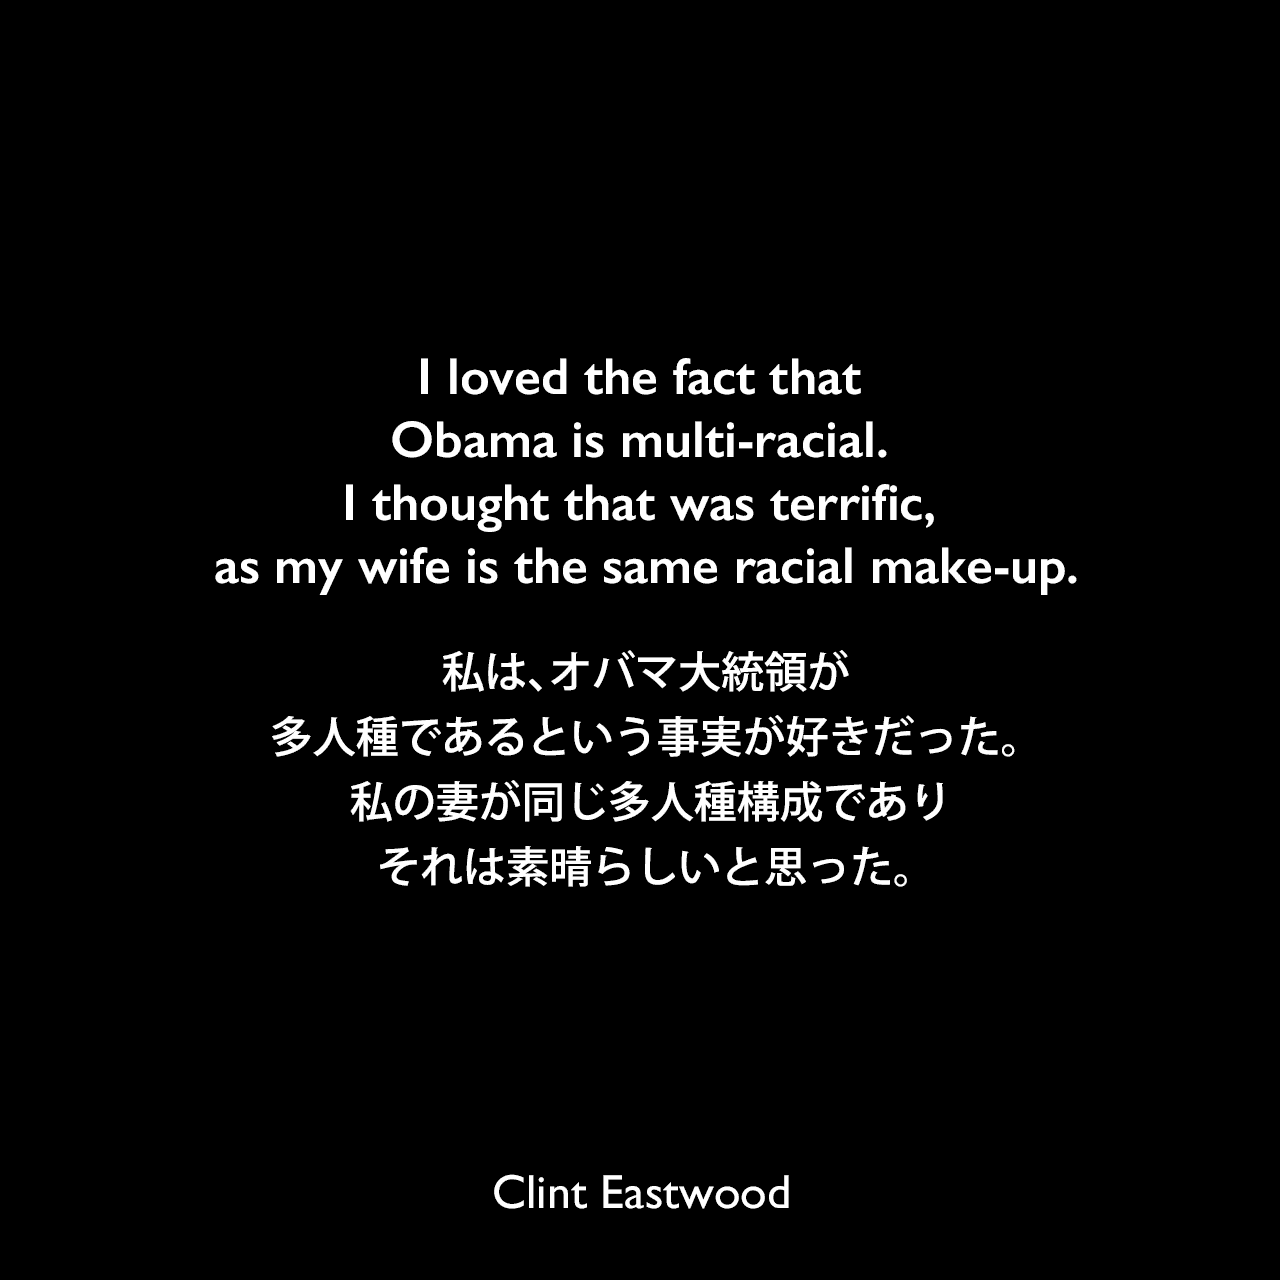 I loved the fact that Obama is multi-racial. I thought that was terrific, as my wife is the same racial make-up.私は、オバマ大統領が多人種であるという事実が好きだった。 私の妻が同じ多人種構成であり、それは素晴らしいと思った。Clint Eastwood